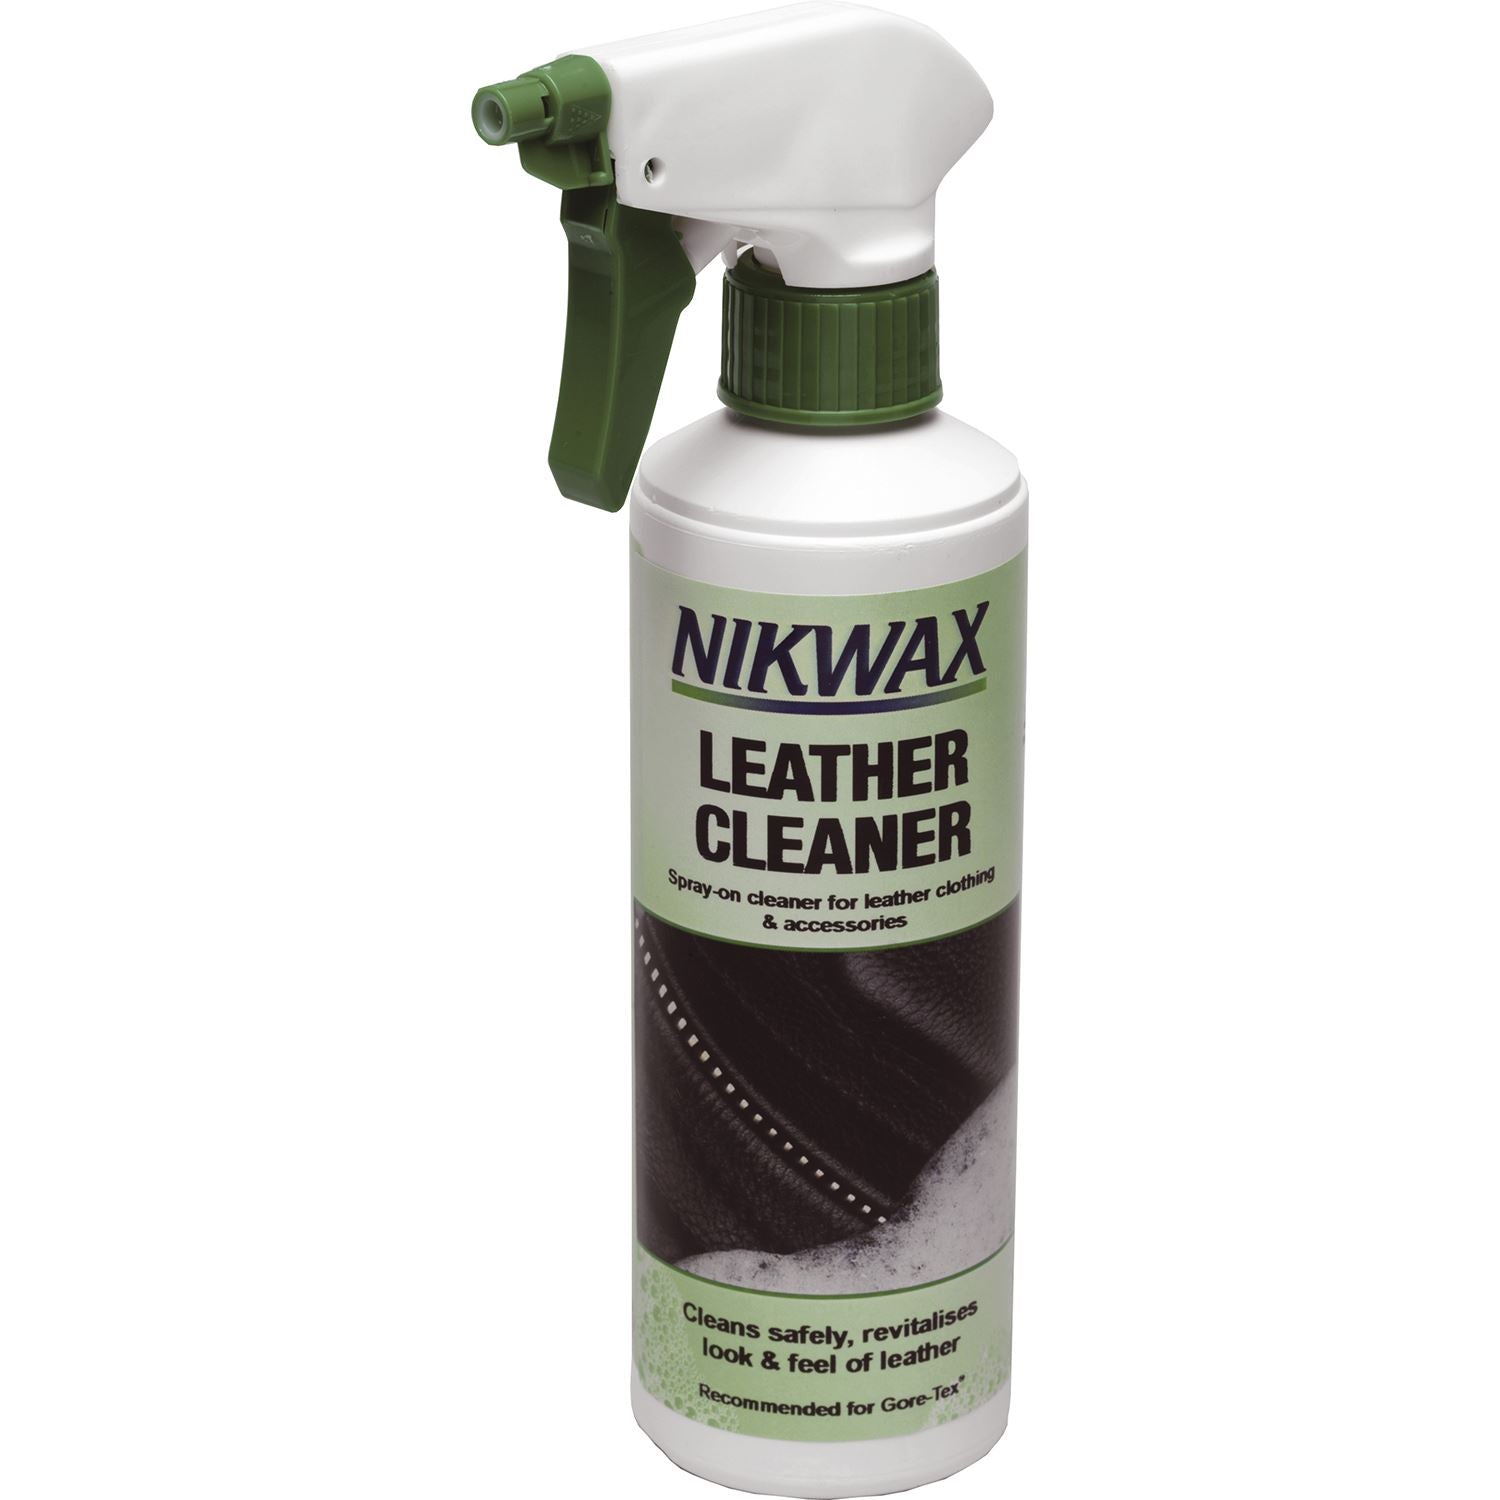 Nikwax Leather Cleaner - Just Horse Riders